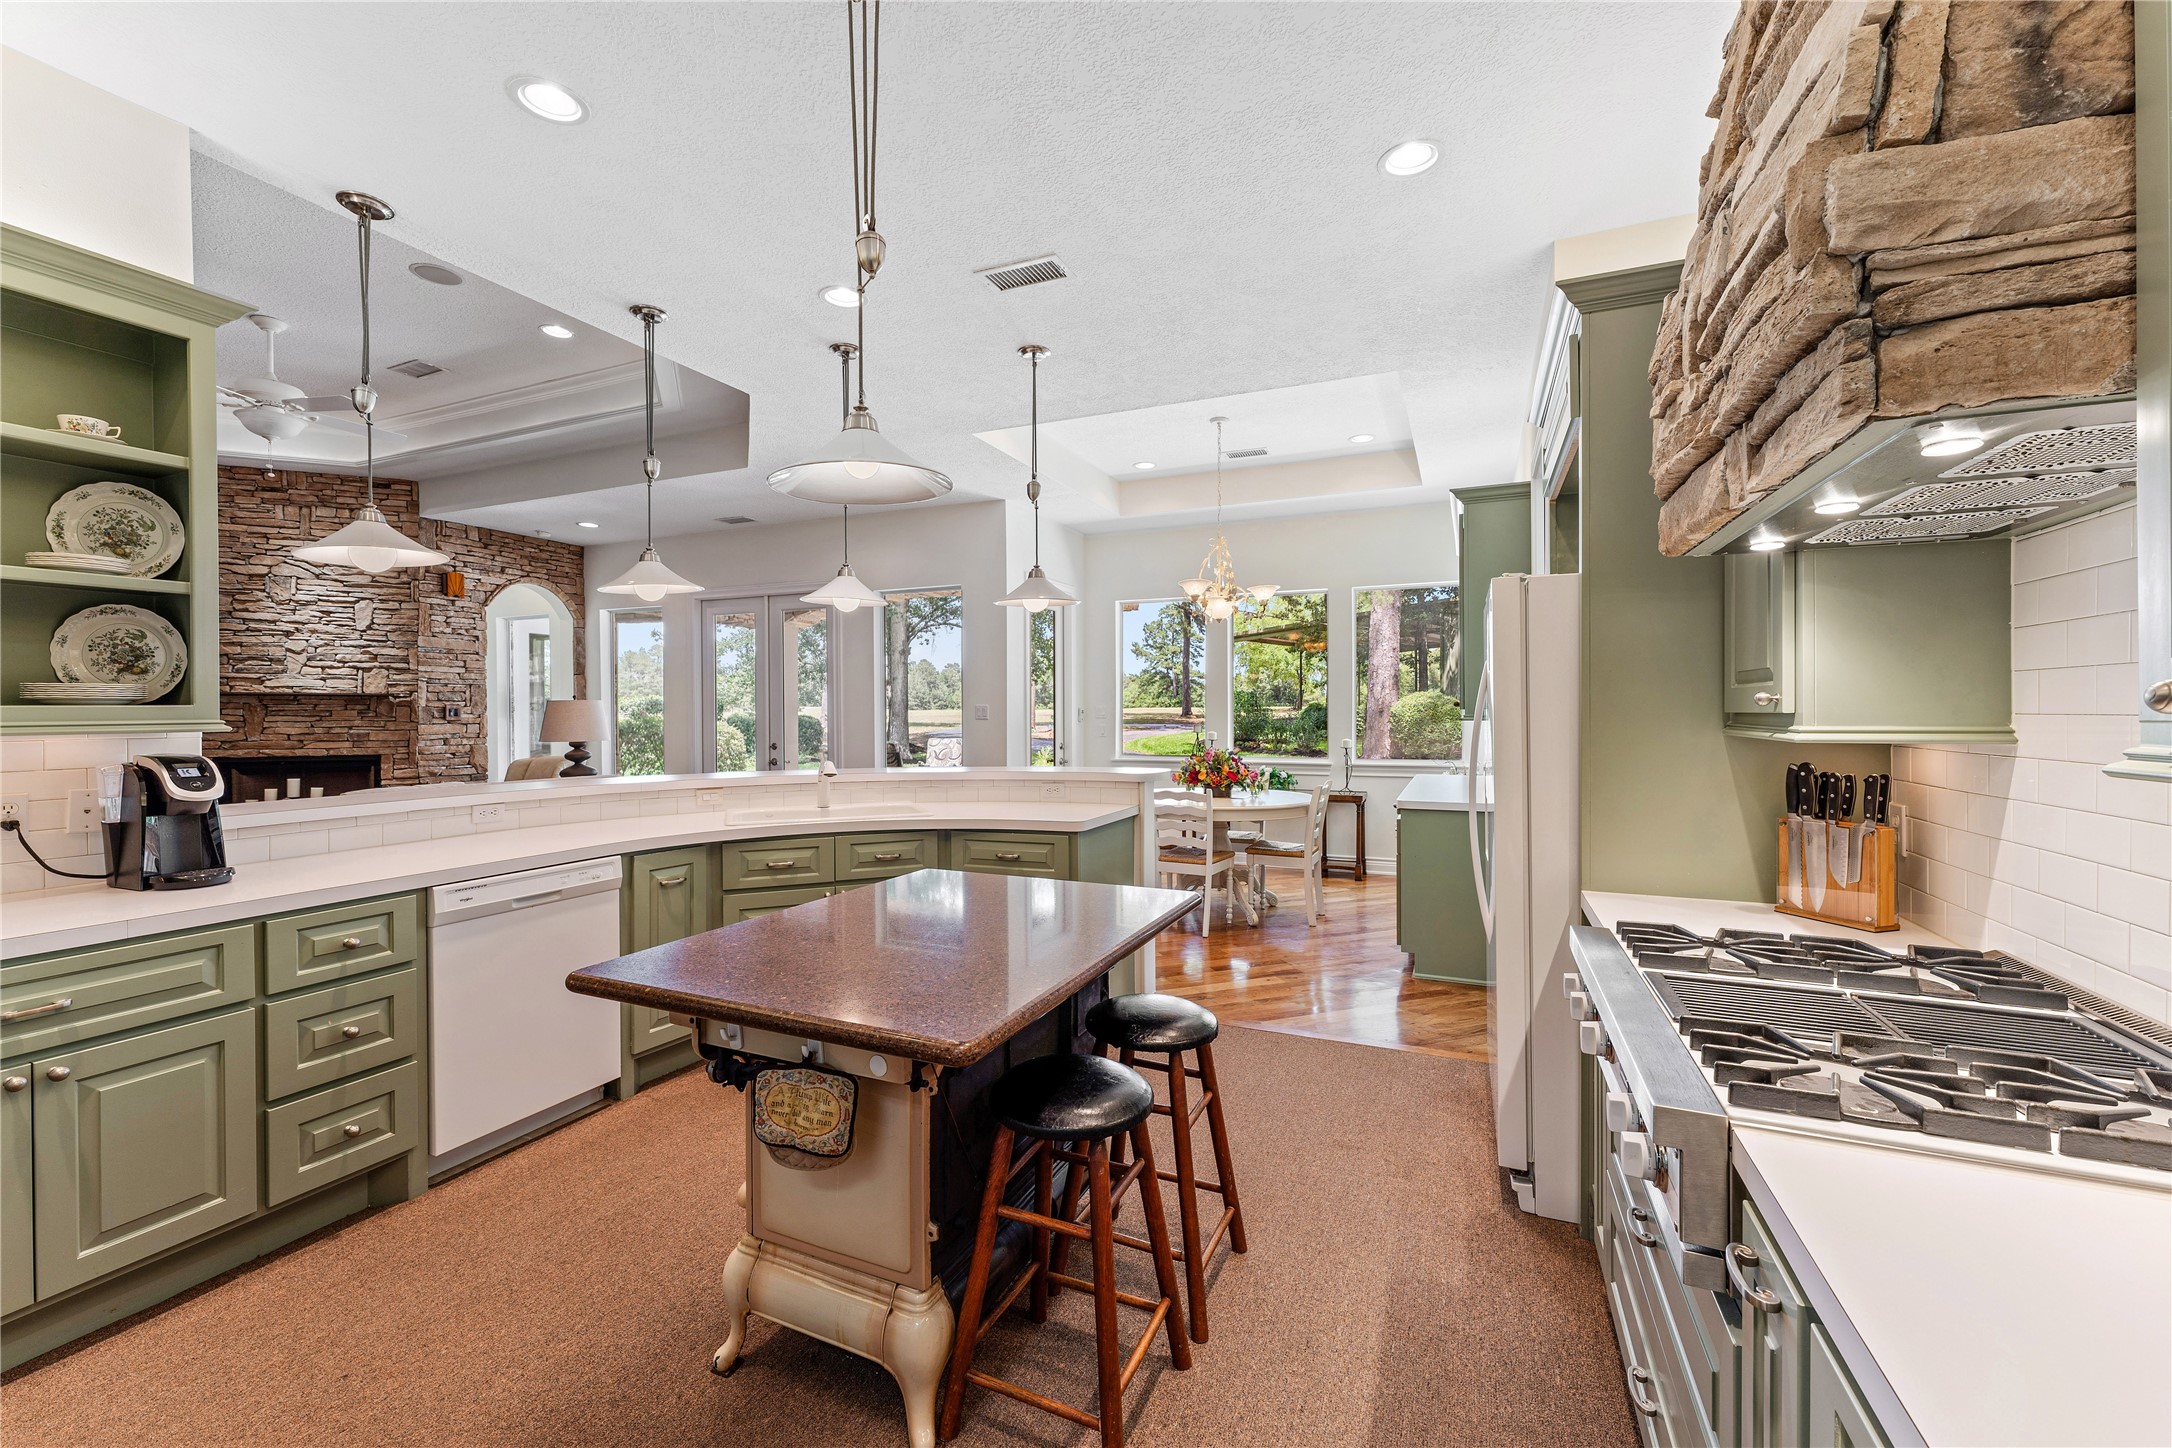 The kitchen provides a generous amount of storage and counter space for preparing meals including a granite-topped antique wood-burning stove island with additional counter seating.